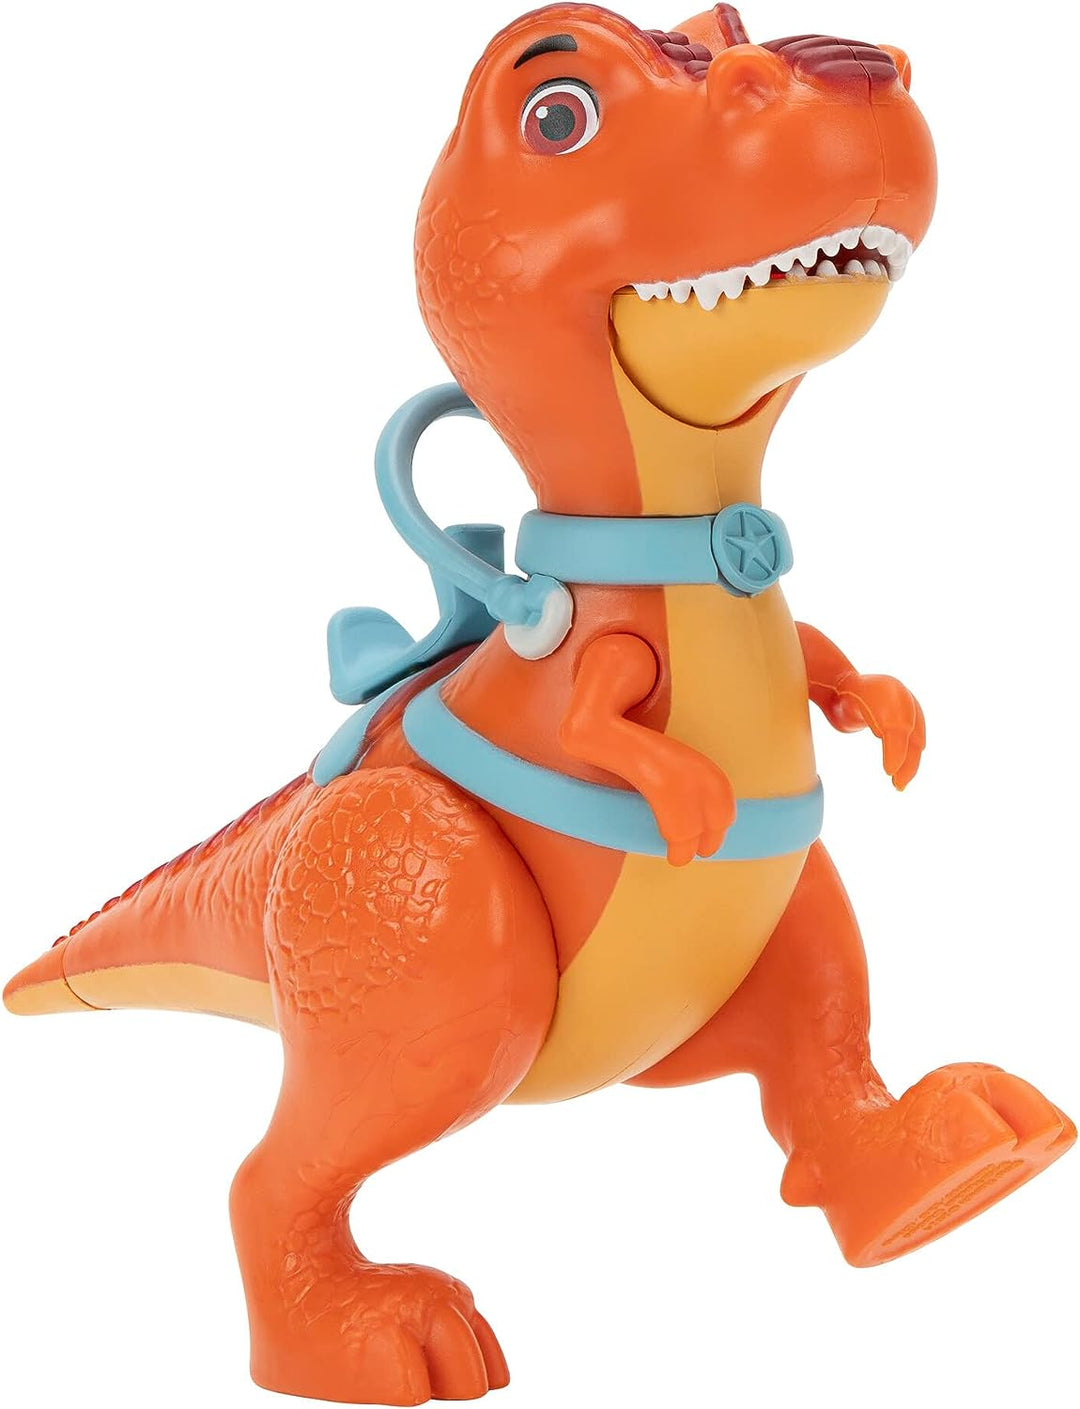 Dino Ranch Deluxe Dino 2-Pack - Features Biscuit, a 5-Inch Toy T-Rex, and Angus